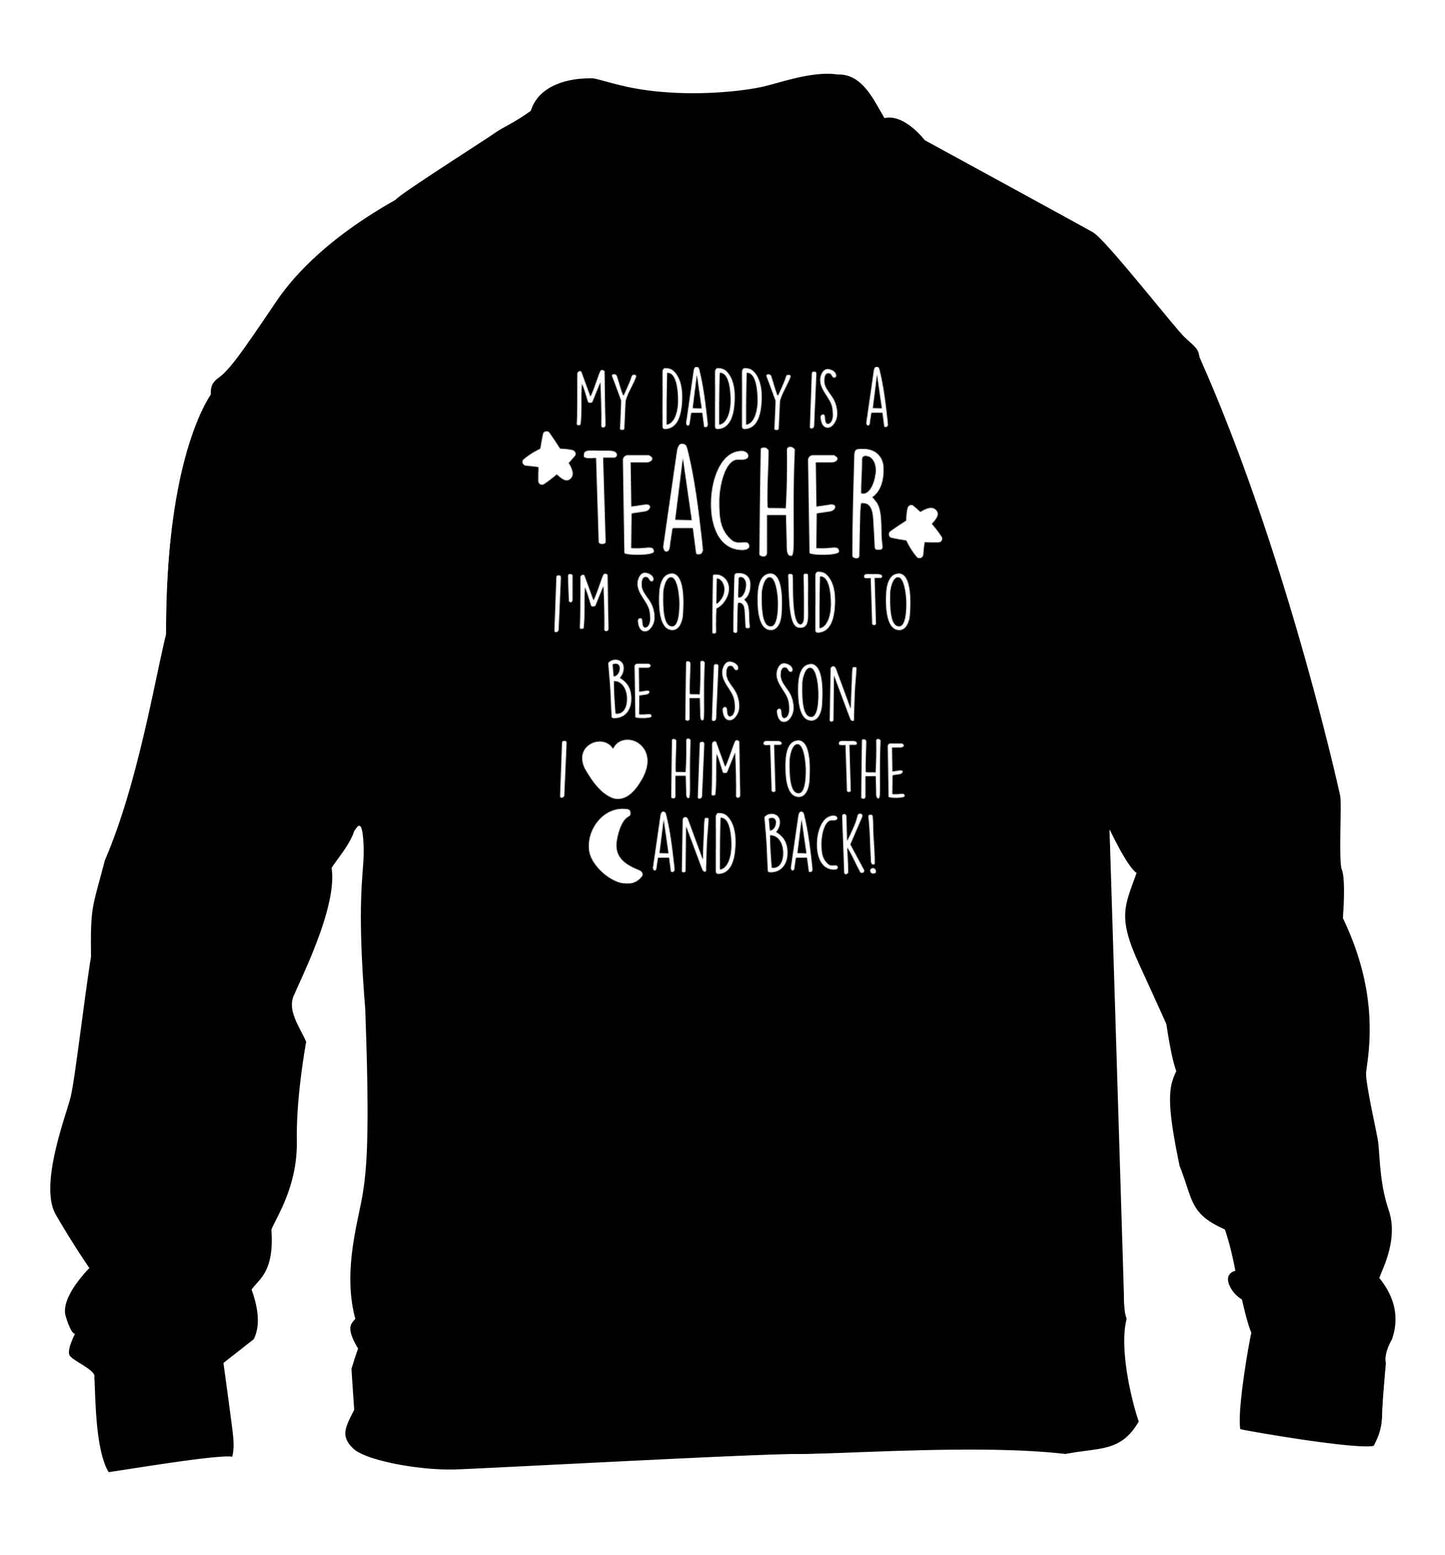 My daddy is a teacher I'm so proud to be his son I love her to the moon and back children's black sweater 12-13 Years